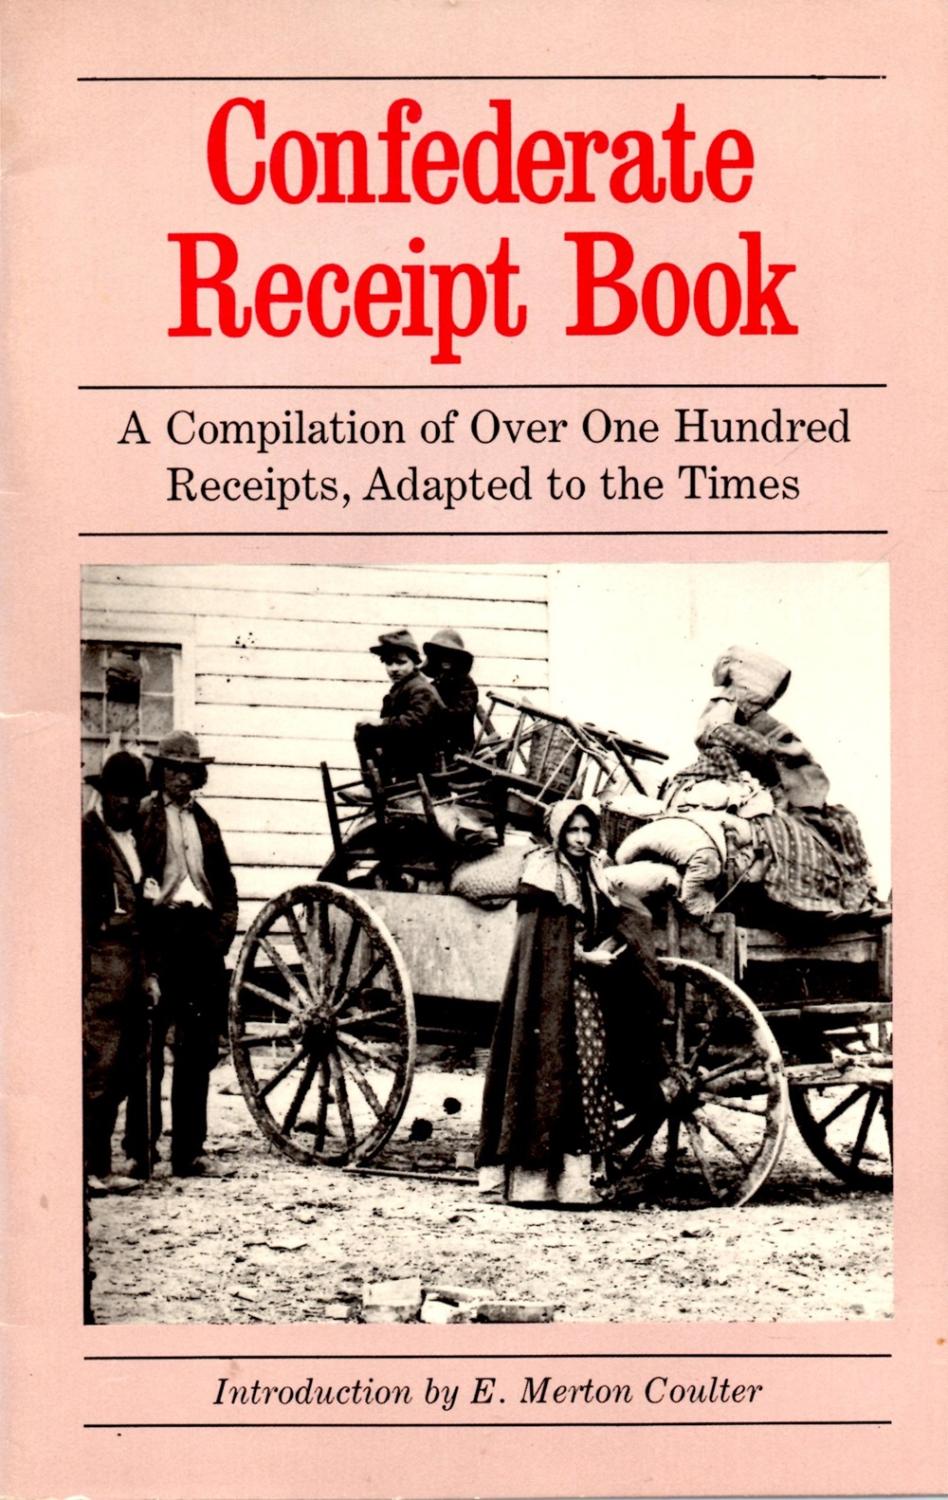 Confederate Receipt Book: A Compilation of Over One Hundred Receipts, Adapted to the Times - Coulter, E. Merton (introduction)